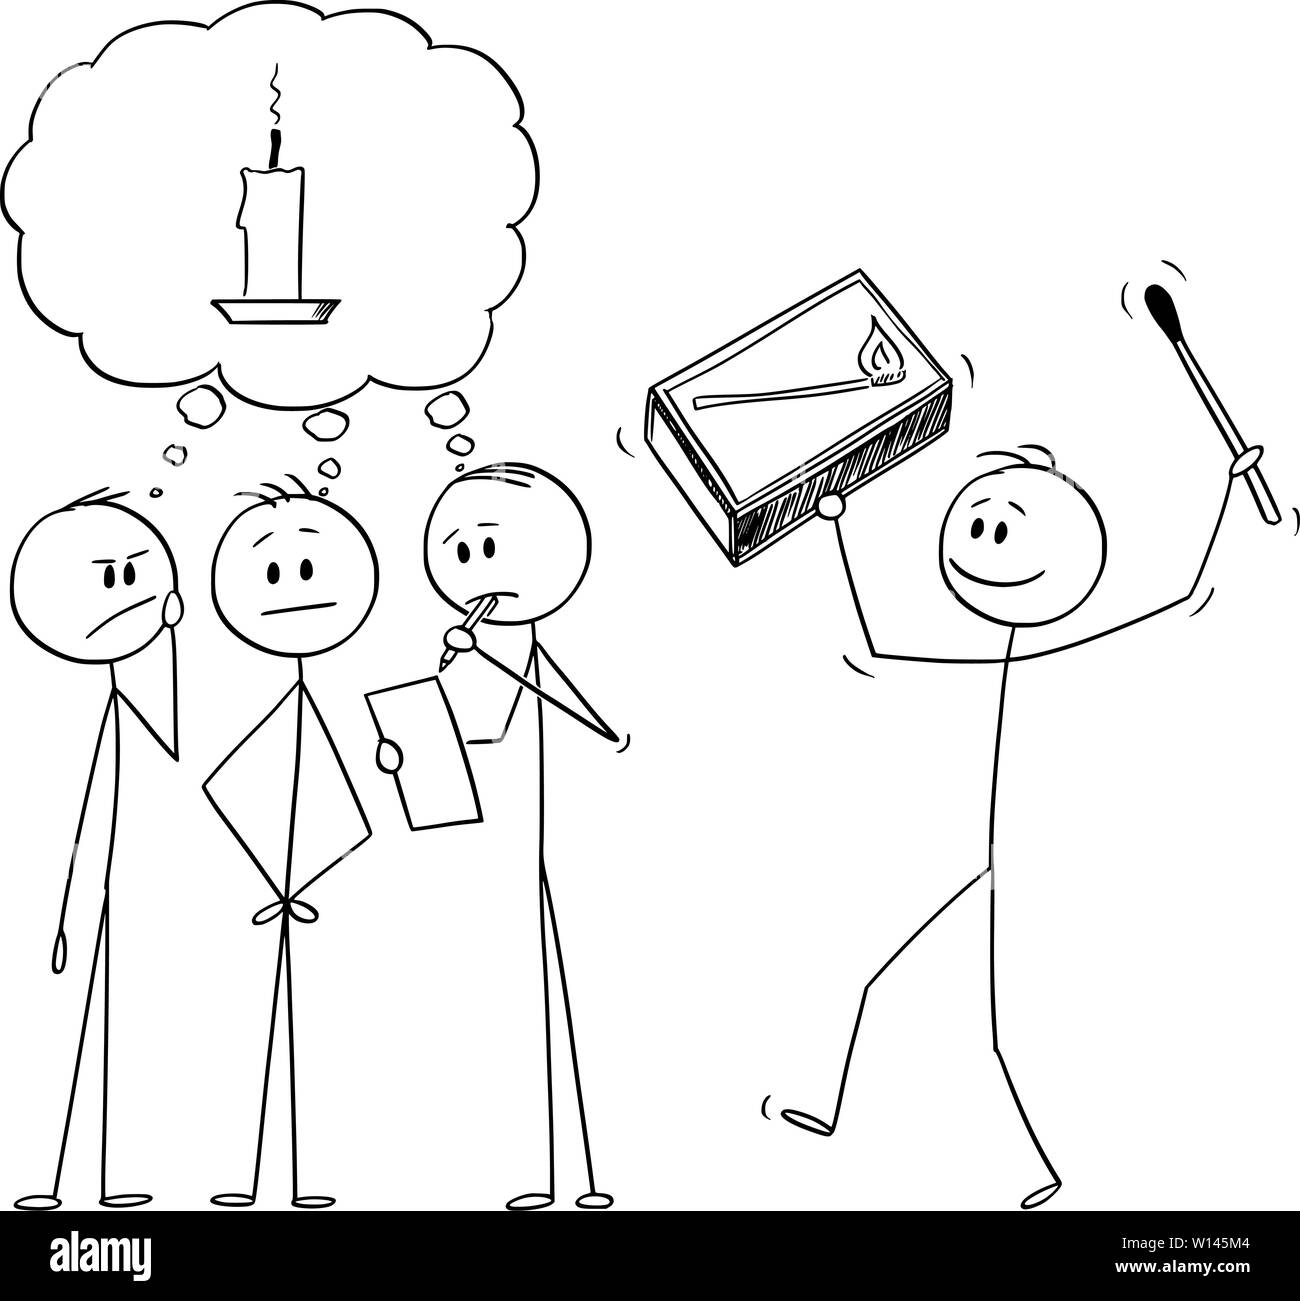 Vector cartoon stick figure drawing conceptual illustration of team of businessmen brainstorming brainstorming and looking for idea. Another man is bringing box of matches and metaphor of idea. Stock Vector